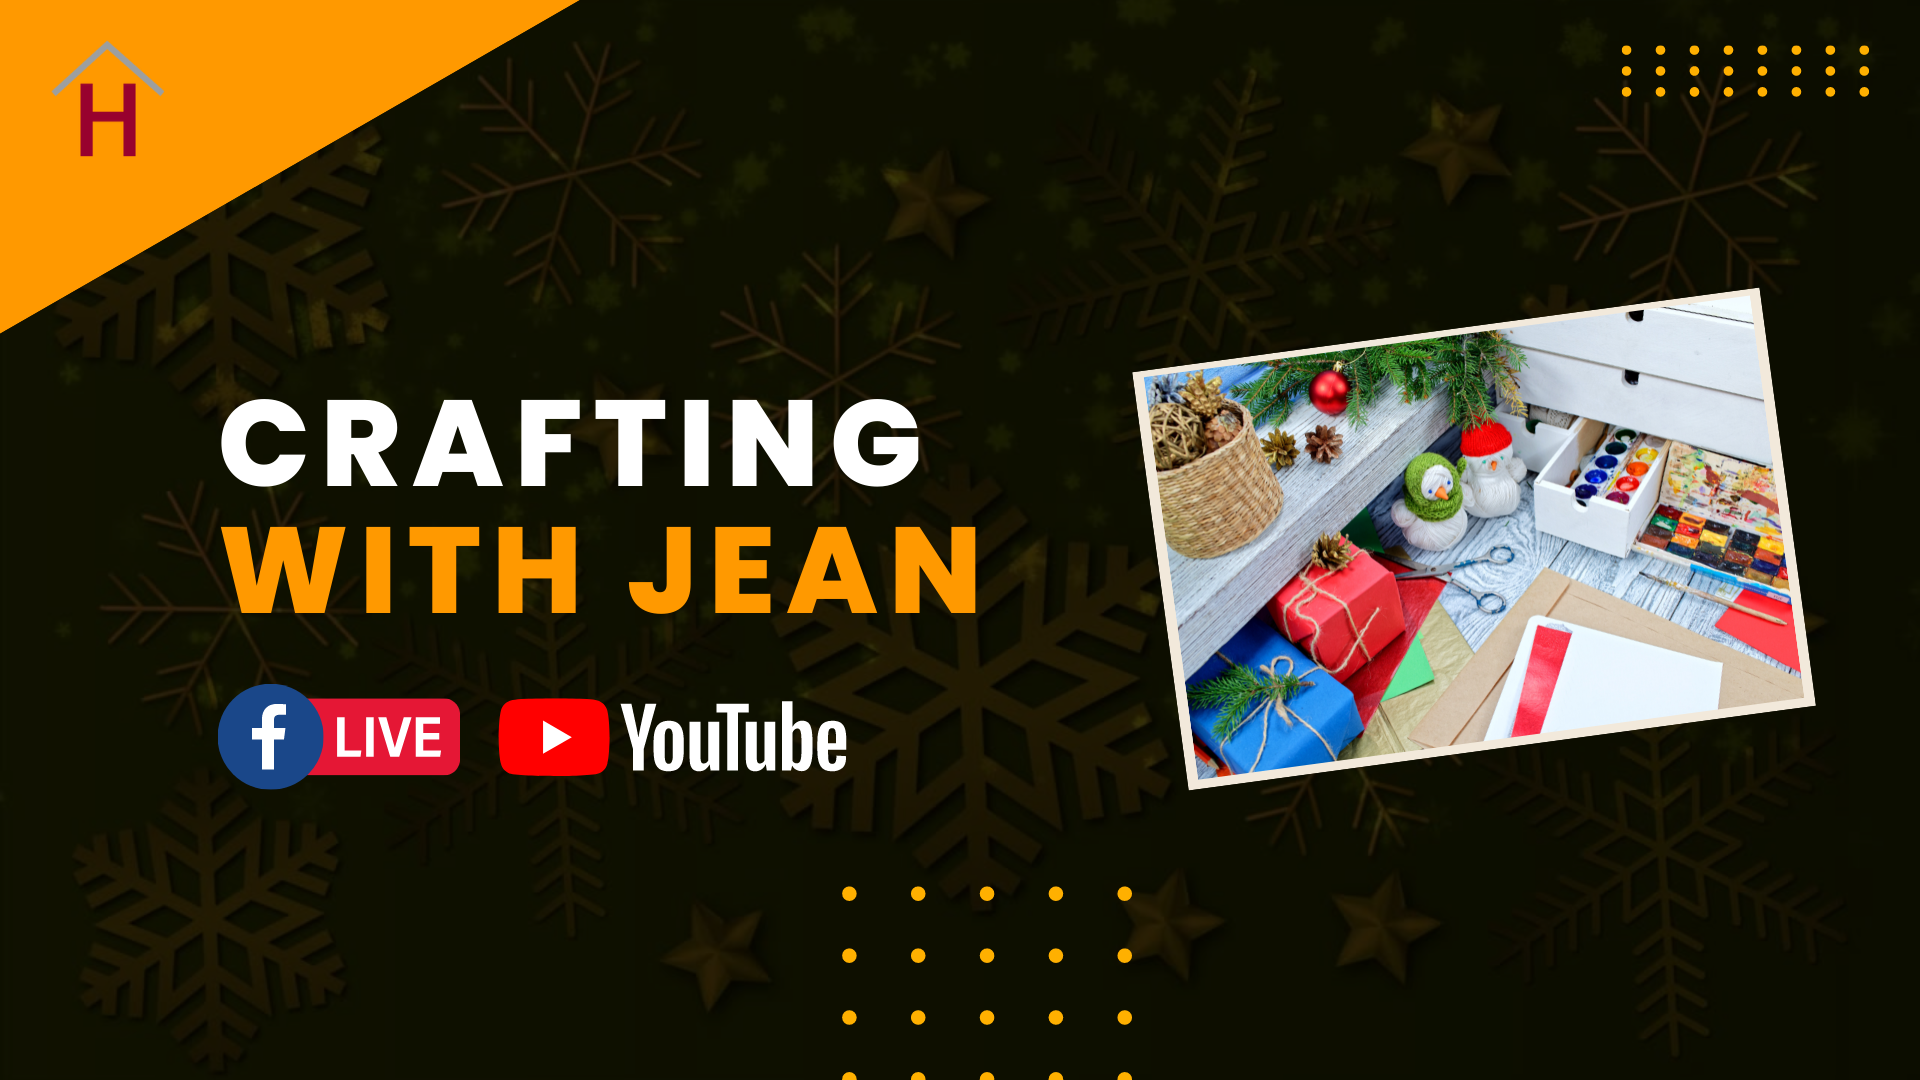 Crafting with Jean